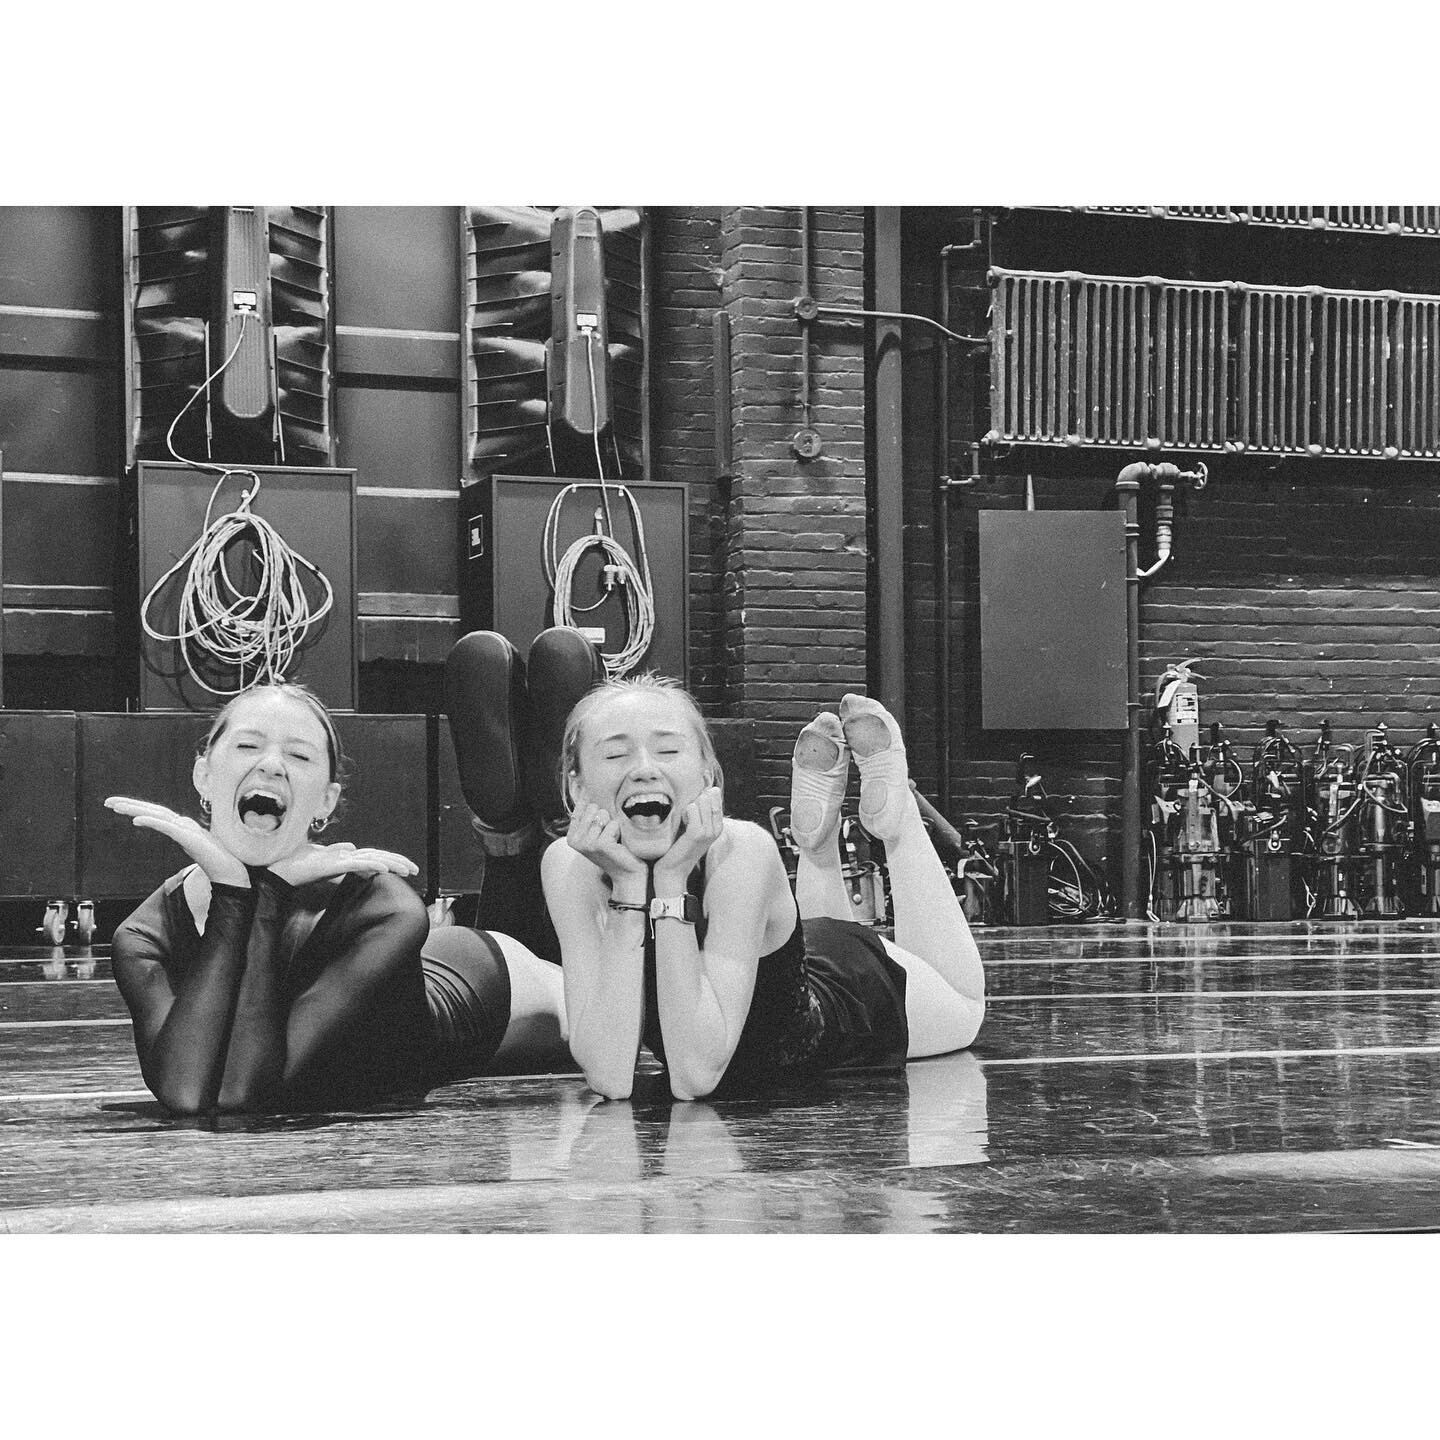 How our JHO 2023 seniors, Megan Polce and Marlo Townsend feel about our 33rd annual production of The Nutcracker premiering ONE WEEK from TODAY! 🩰✨🥳

Click the link in our bio, visit our website jhodance.com or call the box office (315)271-9249 to 